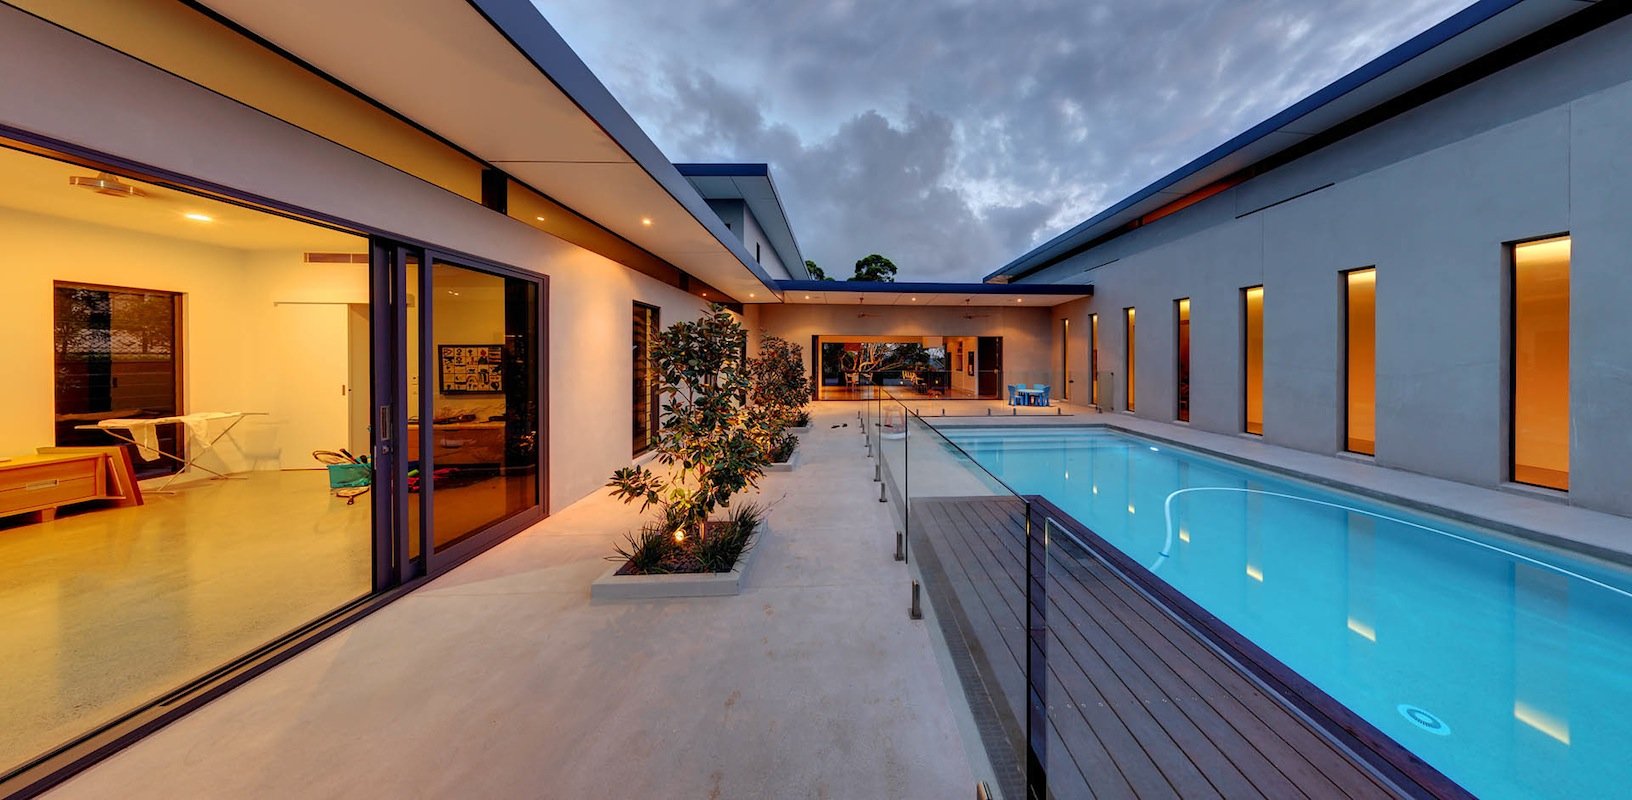 mdesign is a building design practice that operates on the Sunshine Coast.